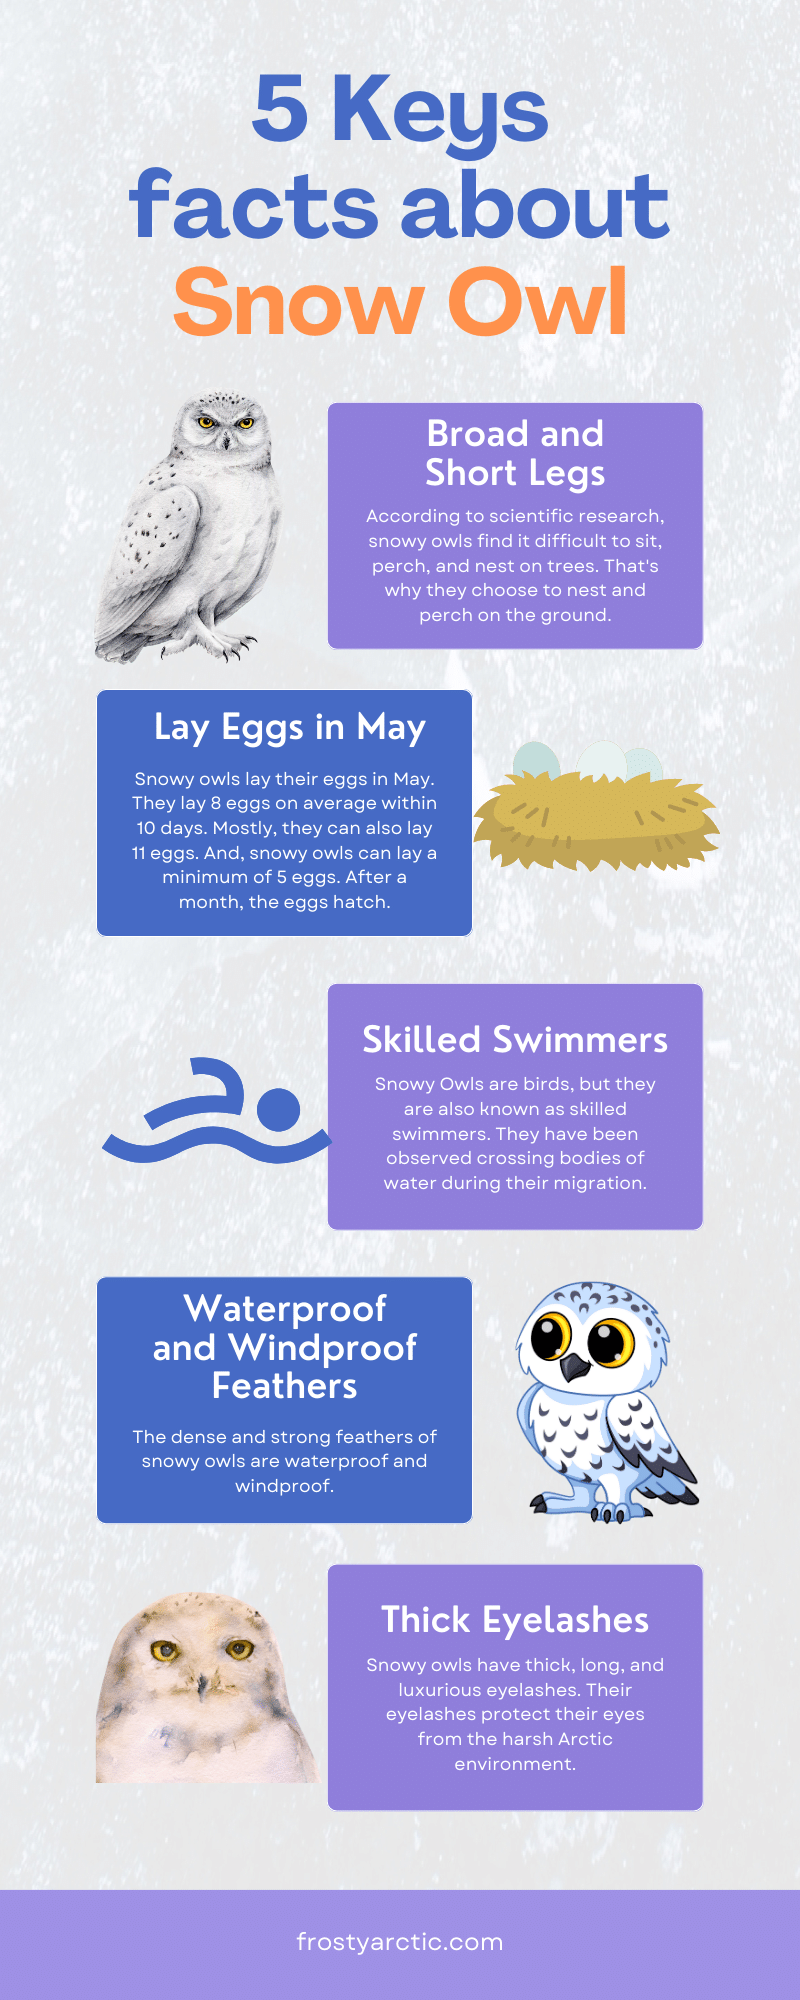 snowy owl facts